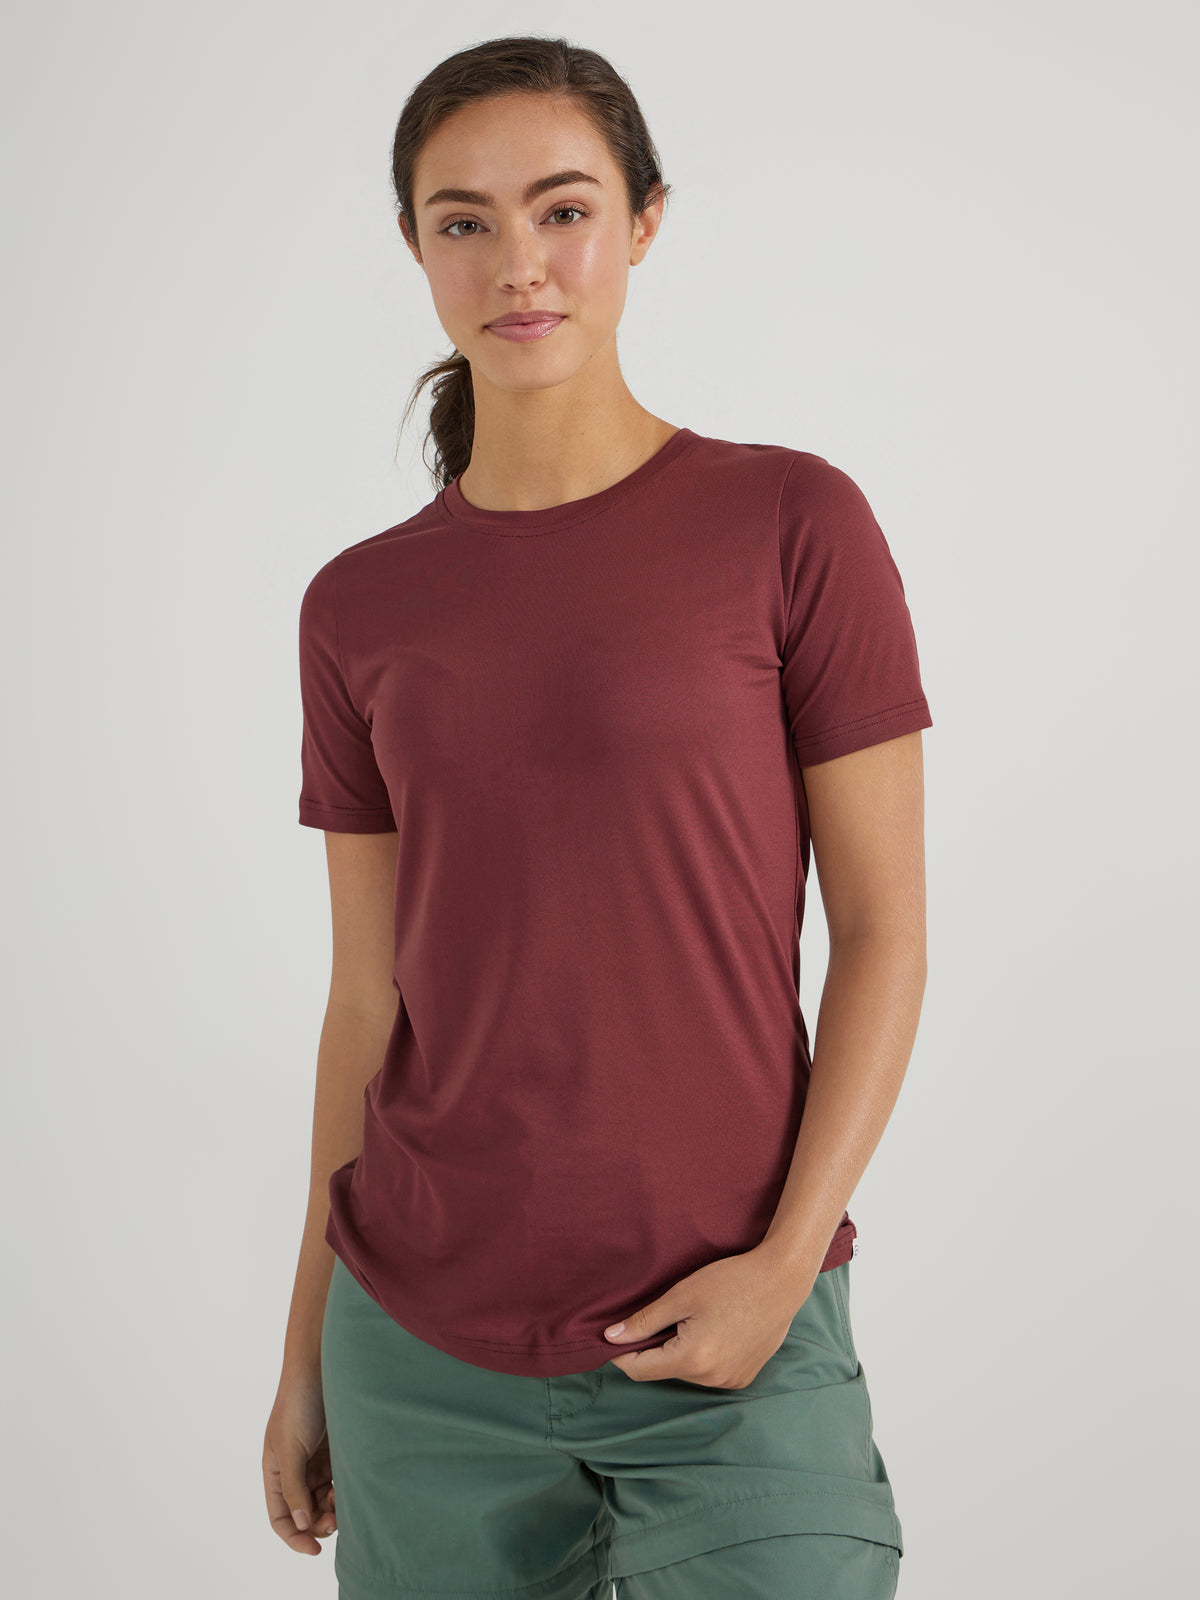 Performance Tee in Red Mahogany